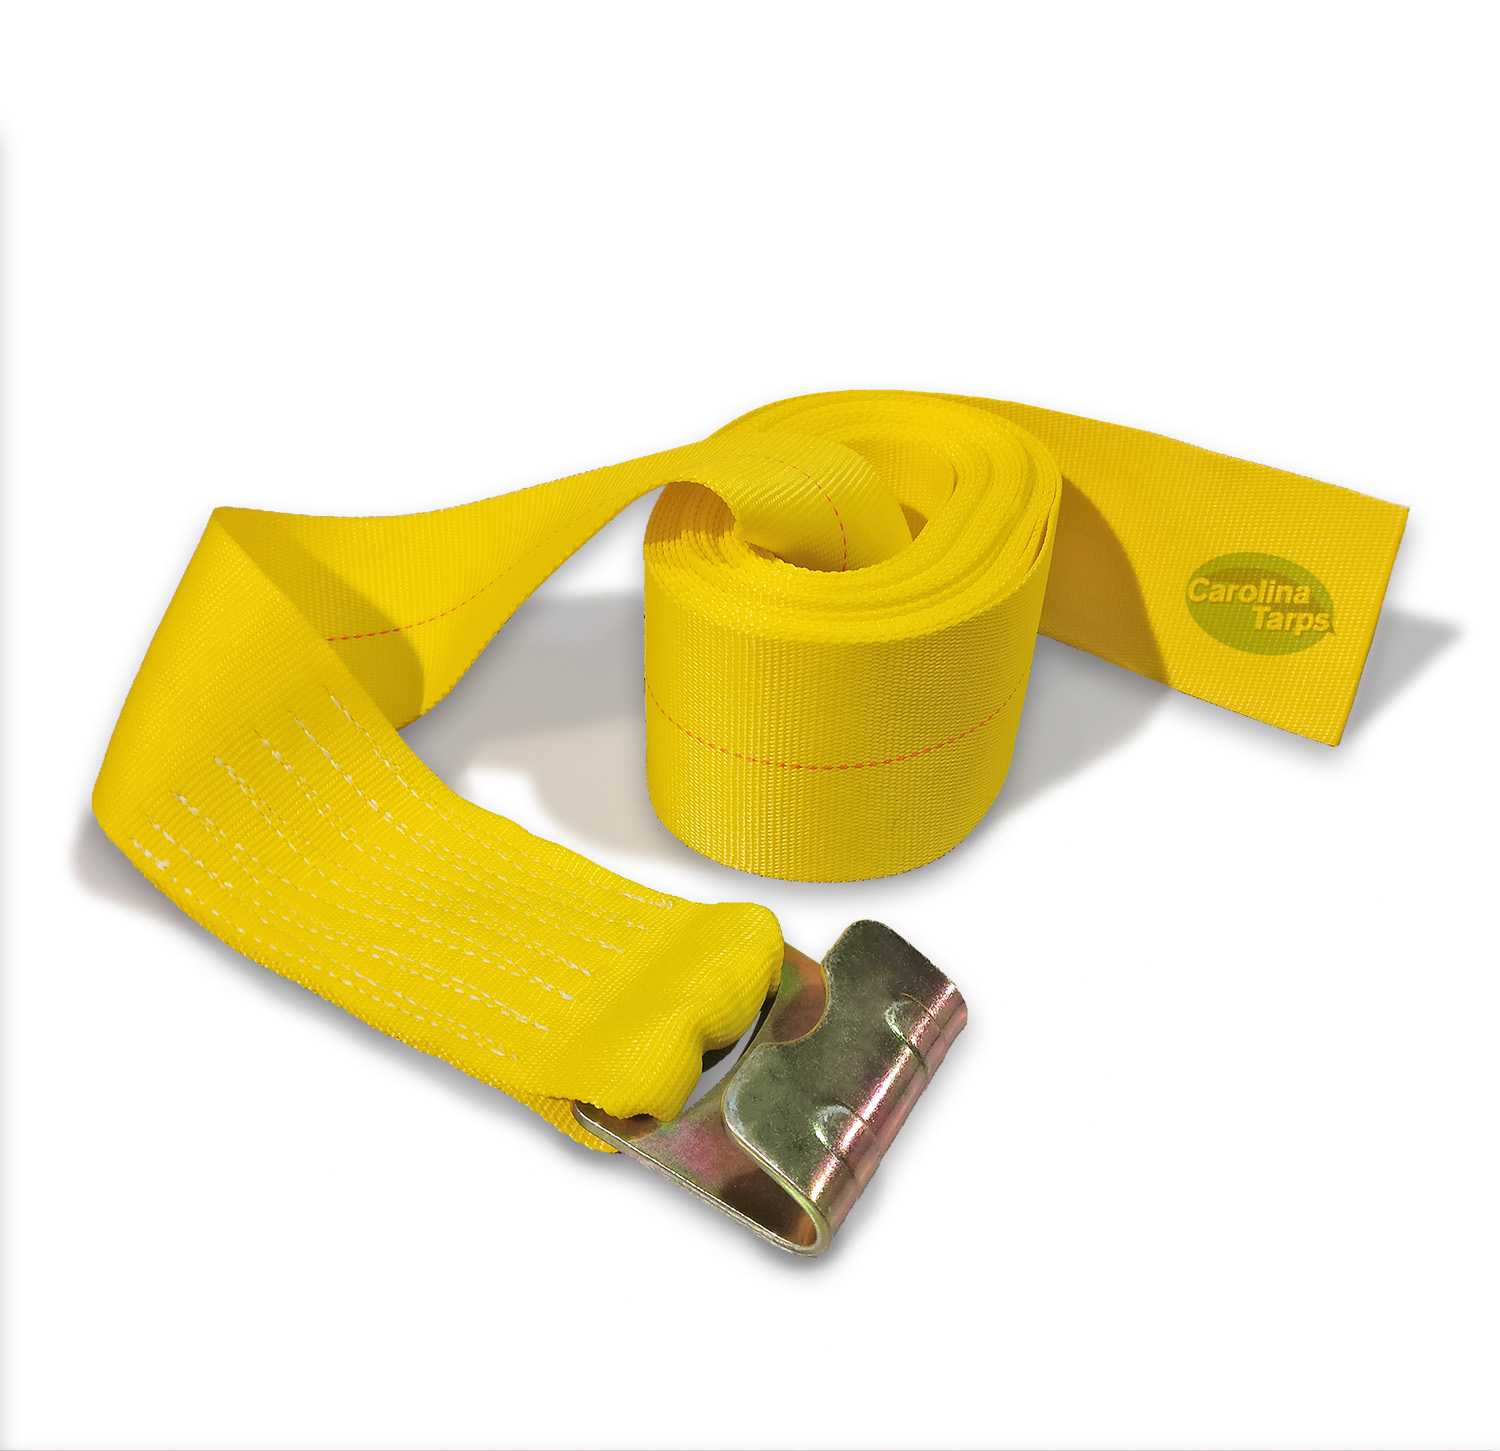 Ten 4 x 30 Winch Straps with Flat Hooks for Flatbed Trailers Trucks